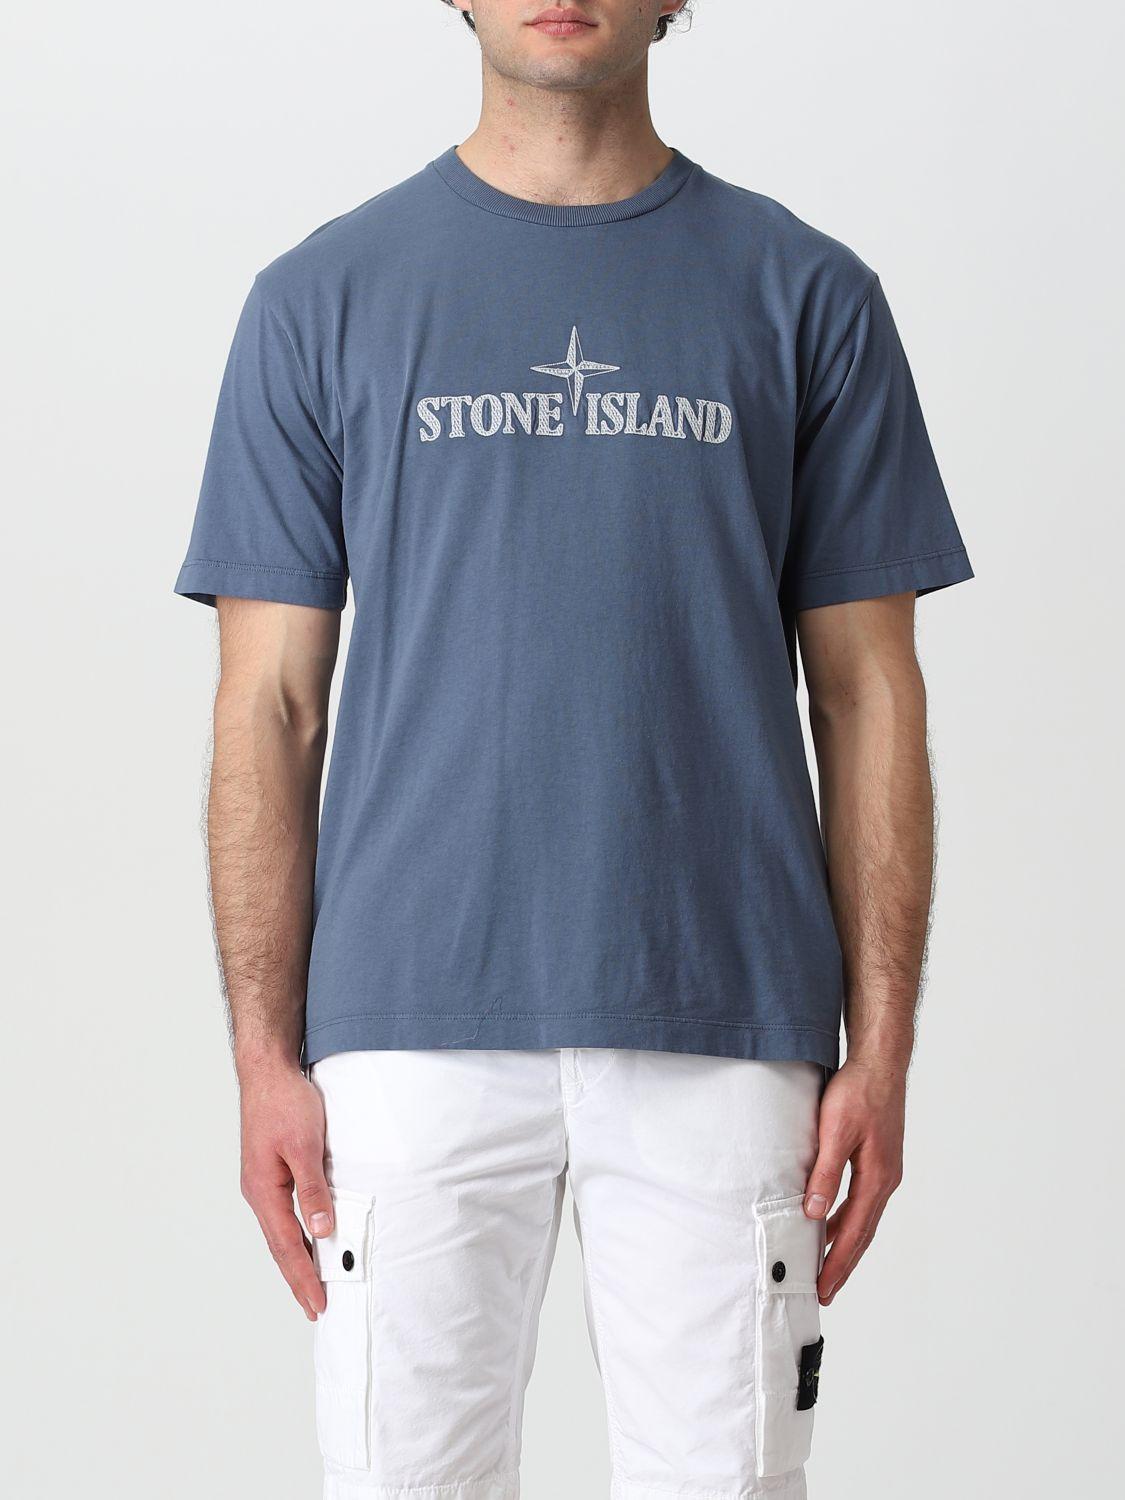 Stone Island T-shirt in Blue for Men | Lyst